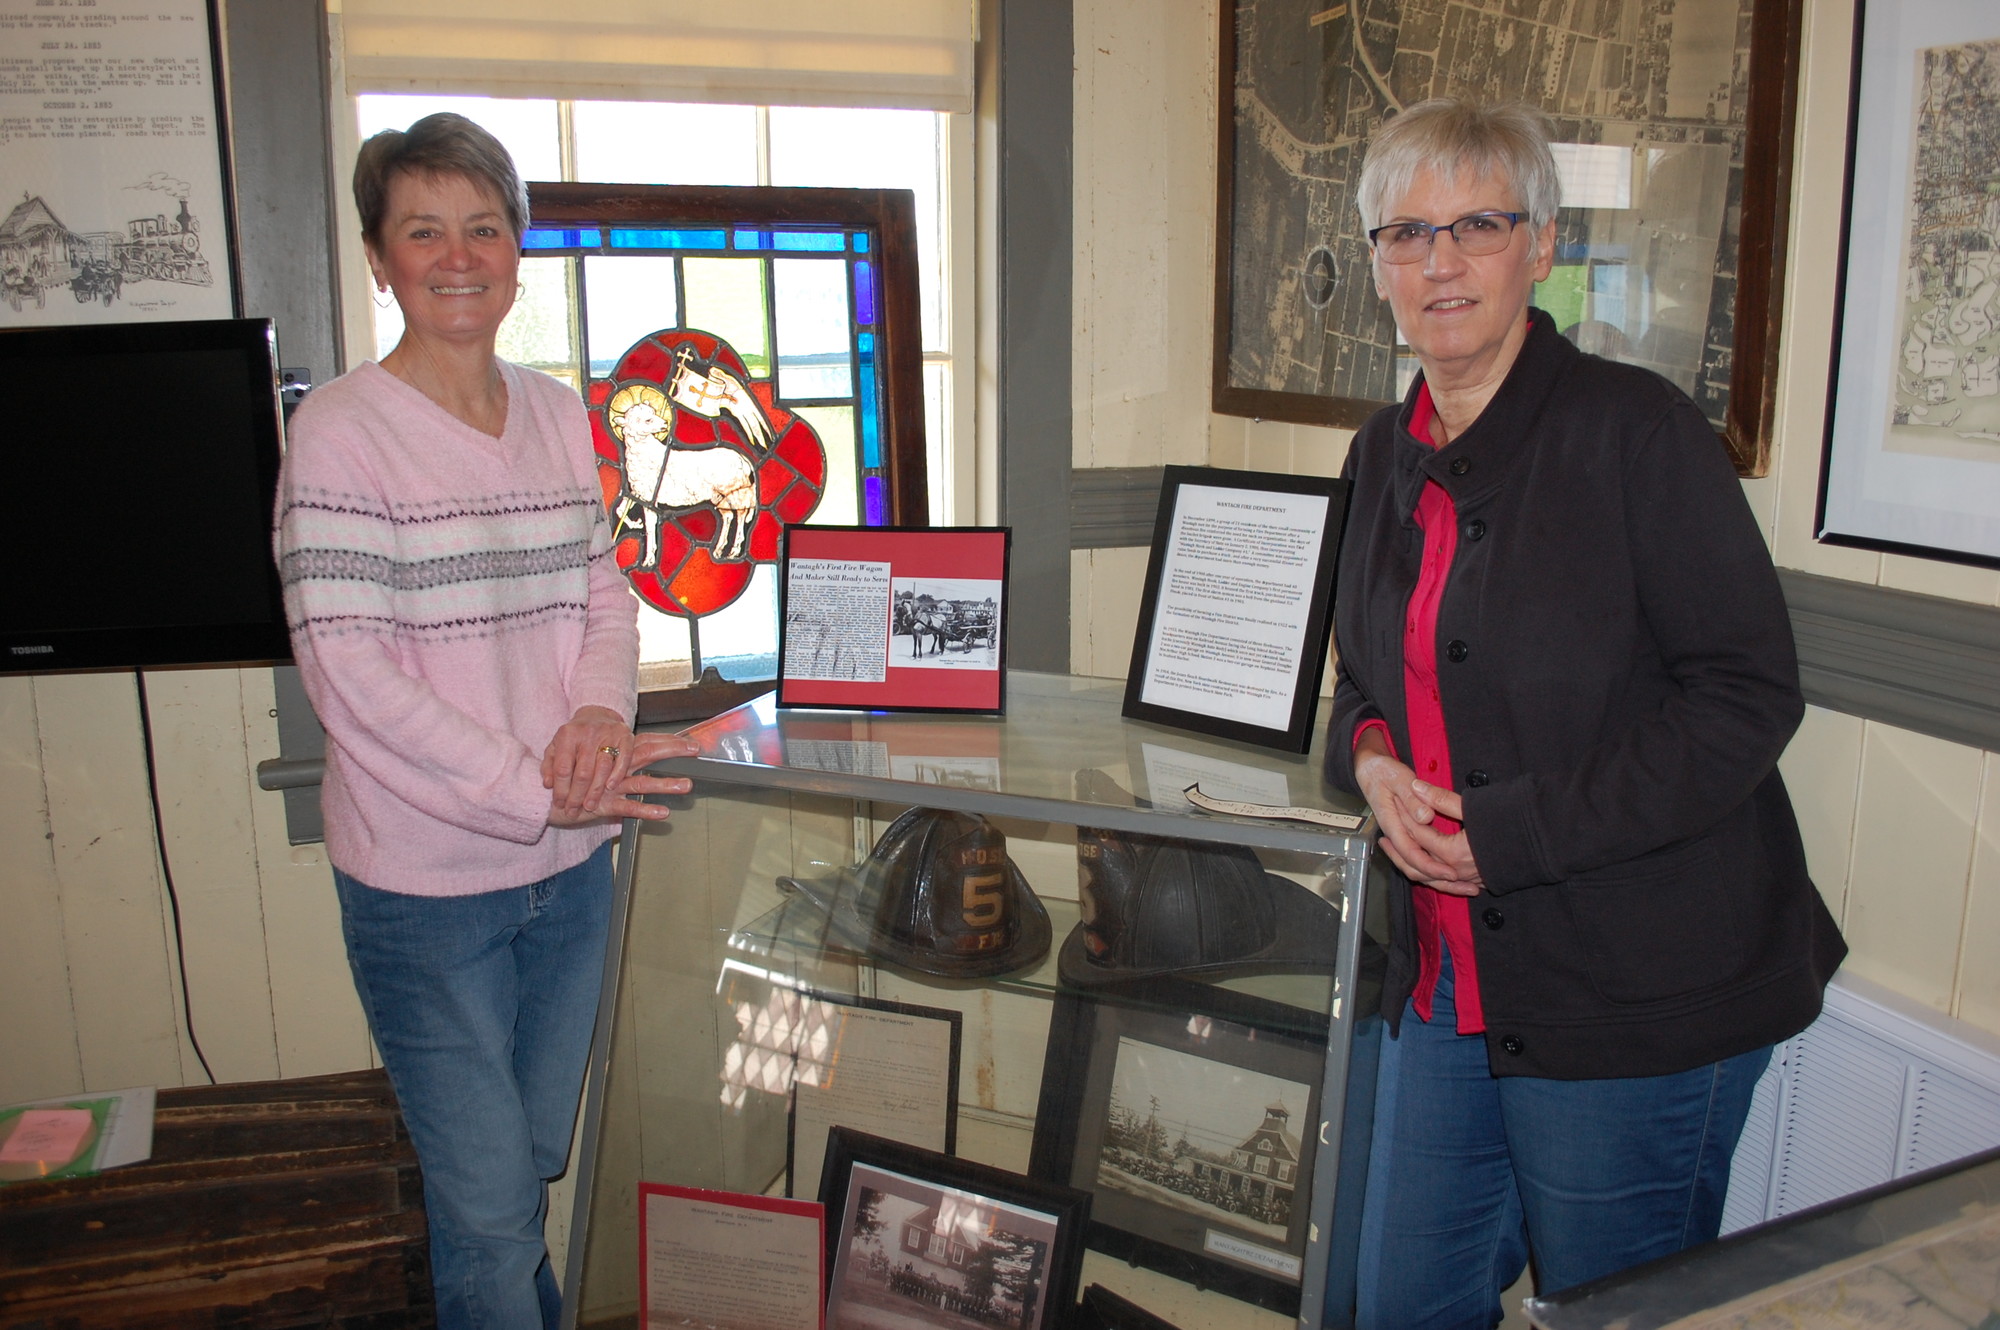 Claire Reisert and Carol Poulos with some of their favorite artifacts in the Wantagh museum.